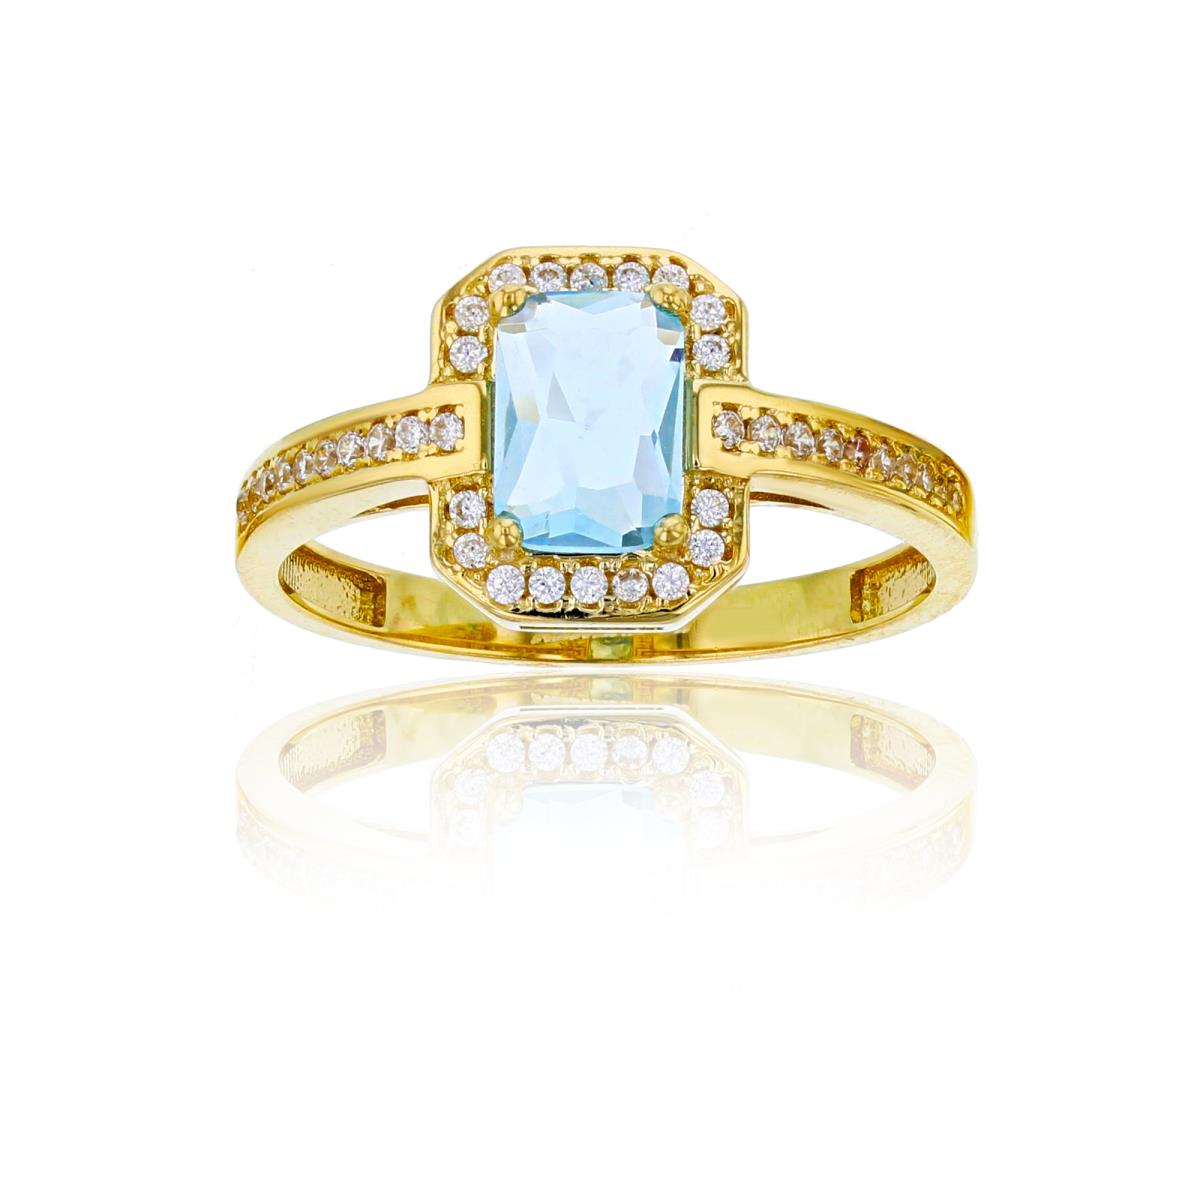 10K Yellow Gold 7x5mm Sky Blue Emerald Cut Halo Engagement Ring